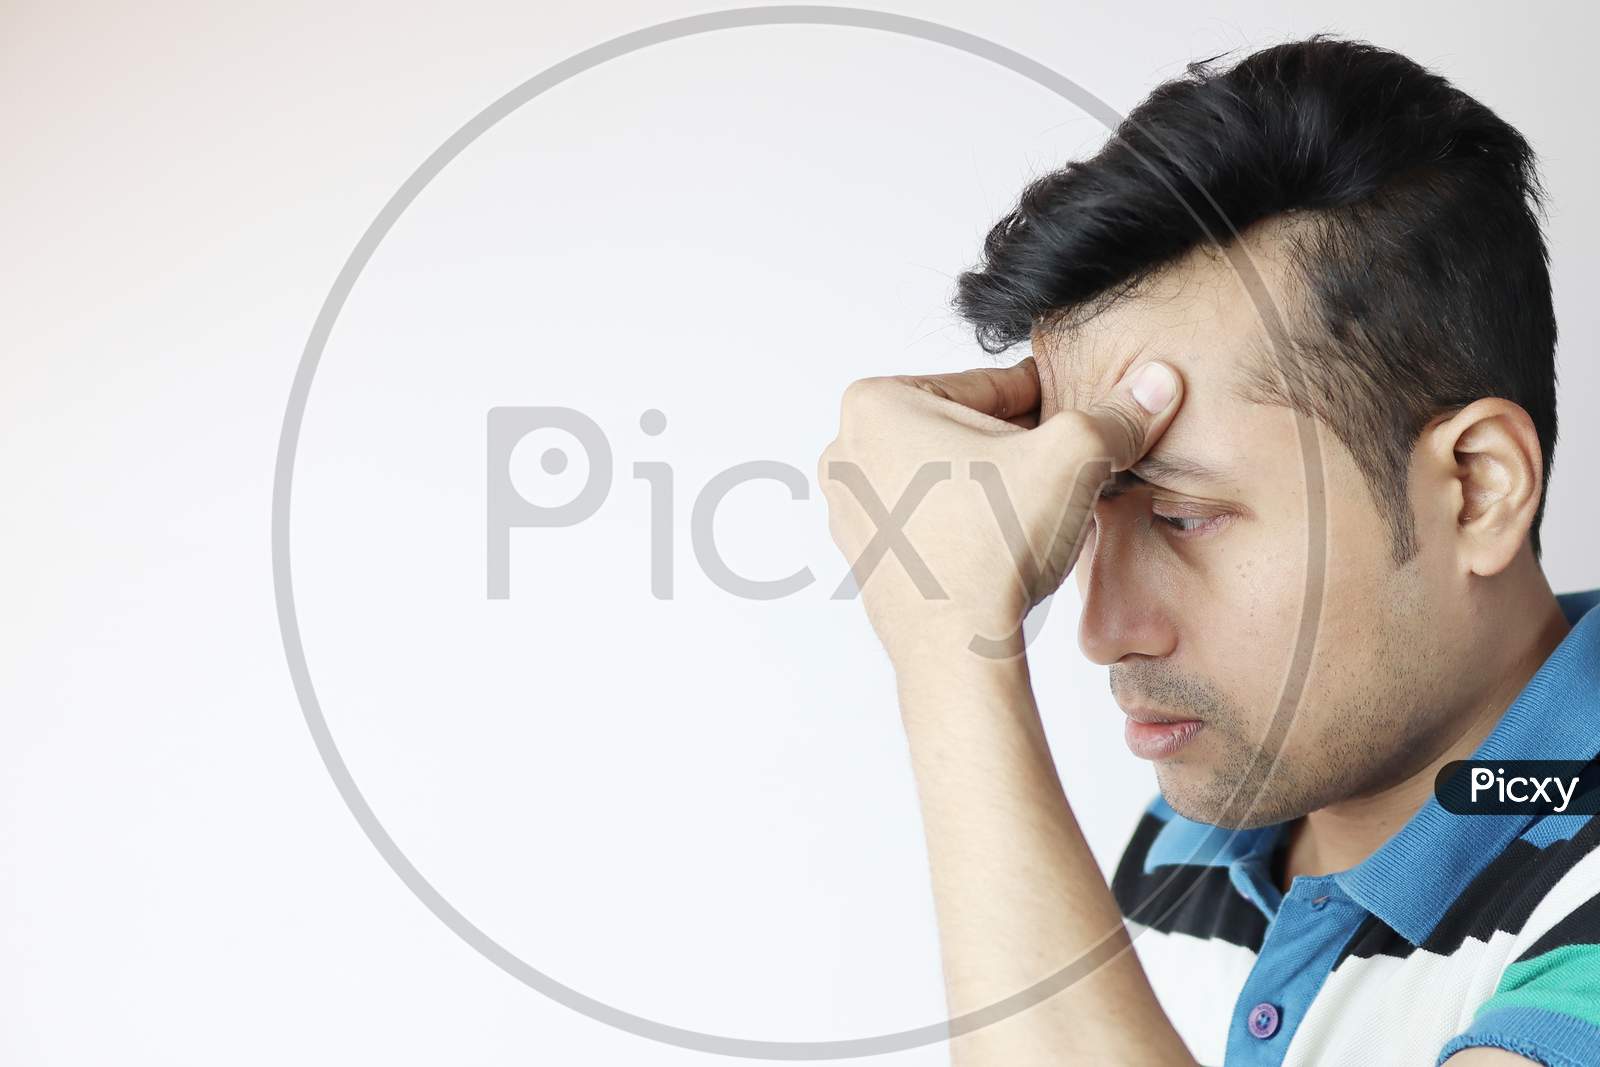 A Young Indian Male With Hands On Forehead With A Very Worried Expression Isolated On White With Copy Space For Text